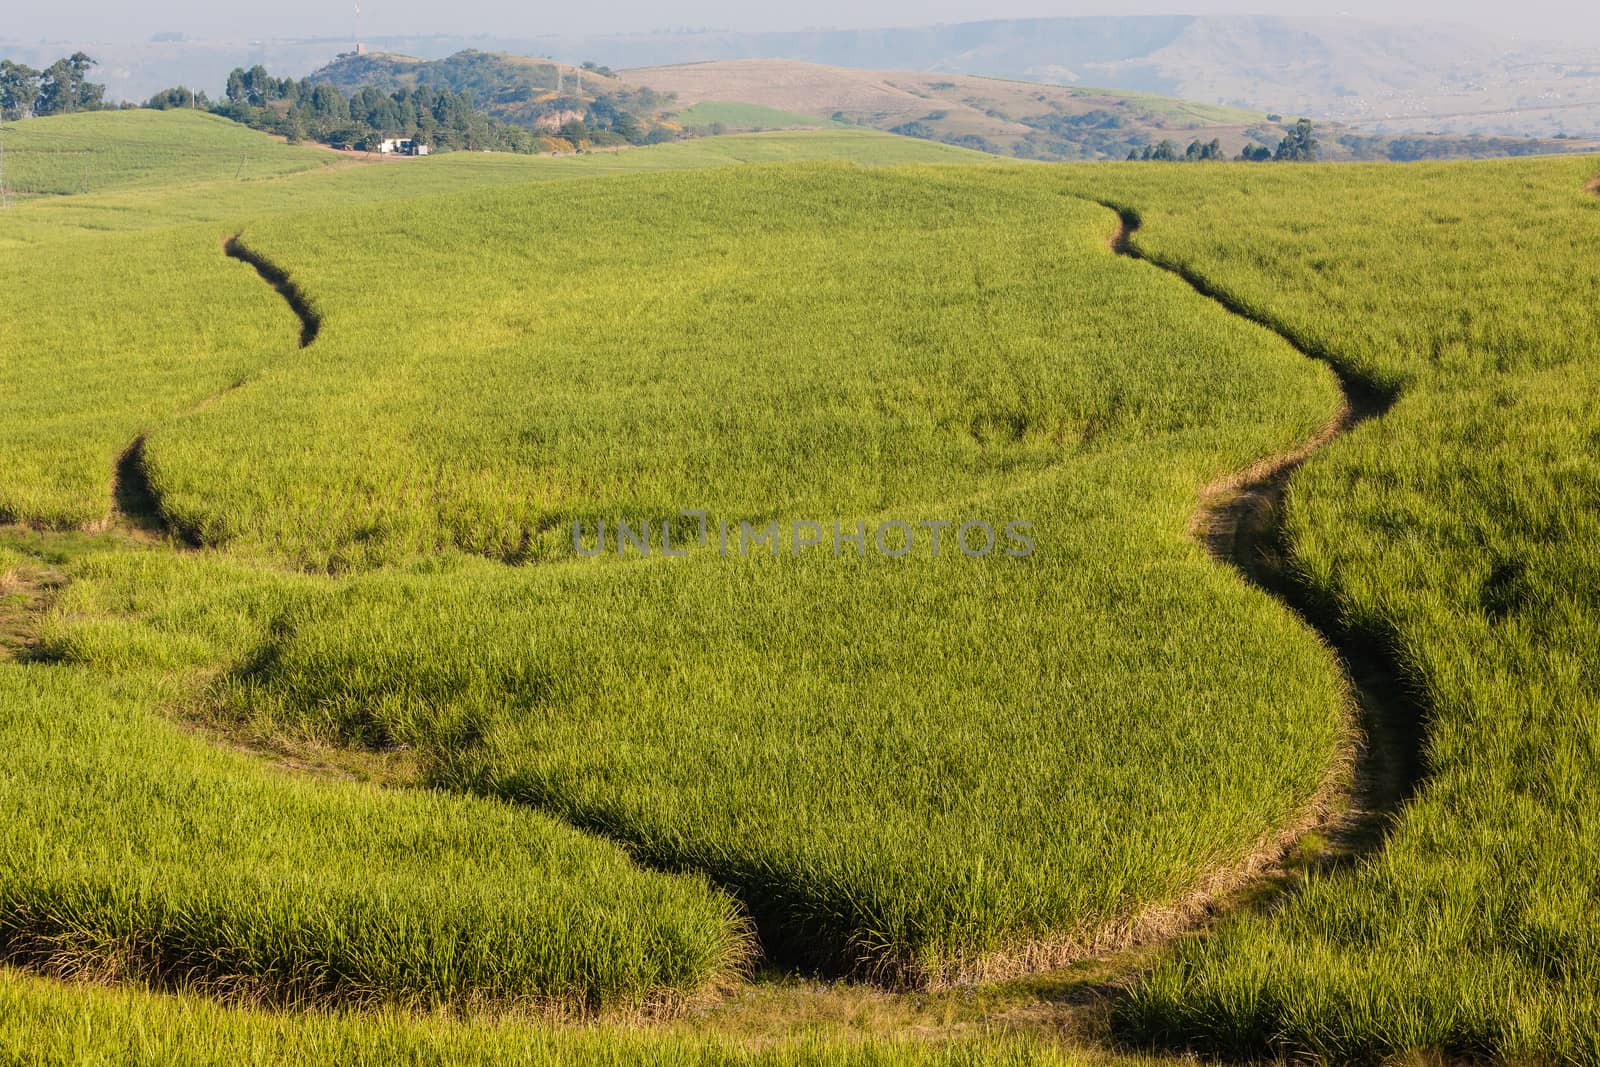 Sugar cane crops spread over the hillside landscape with section firebreaks.